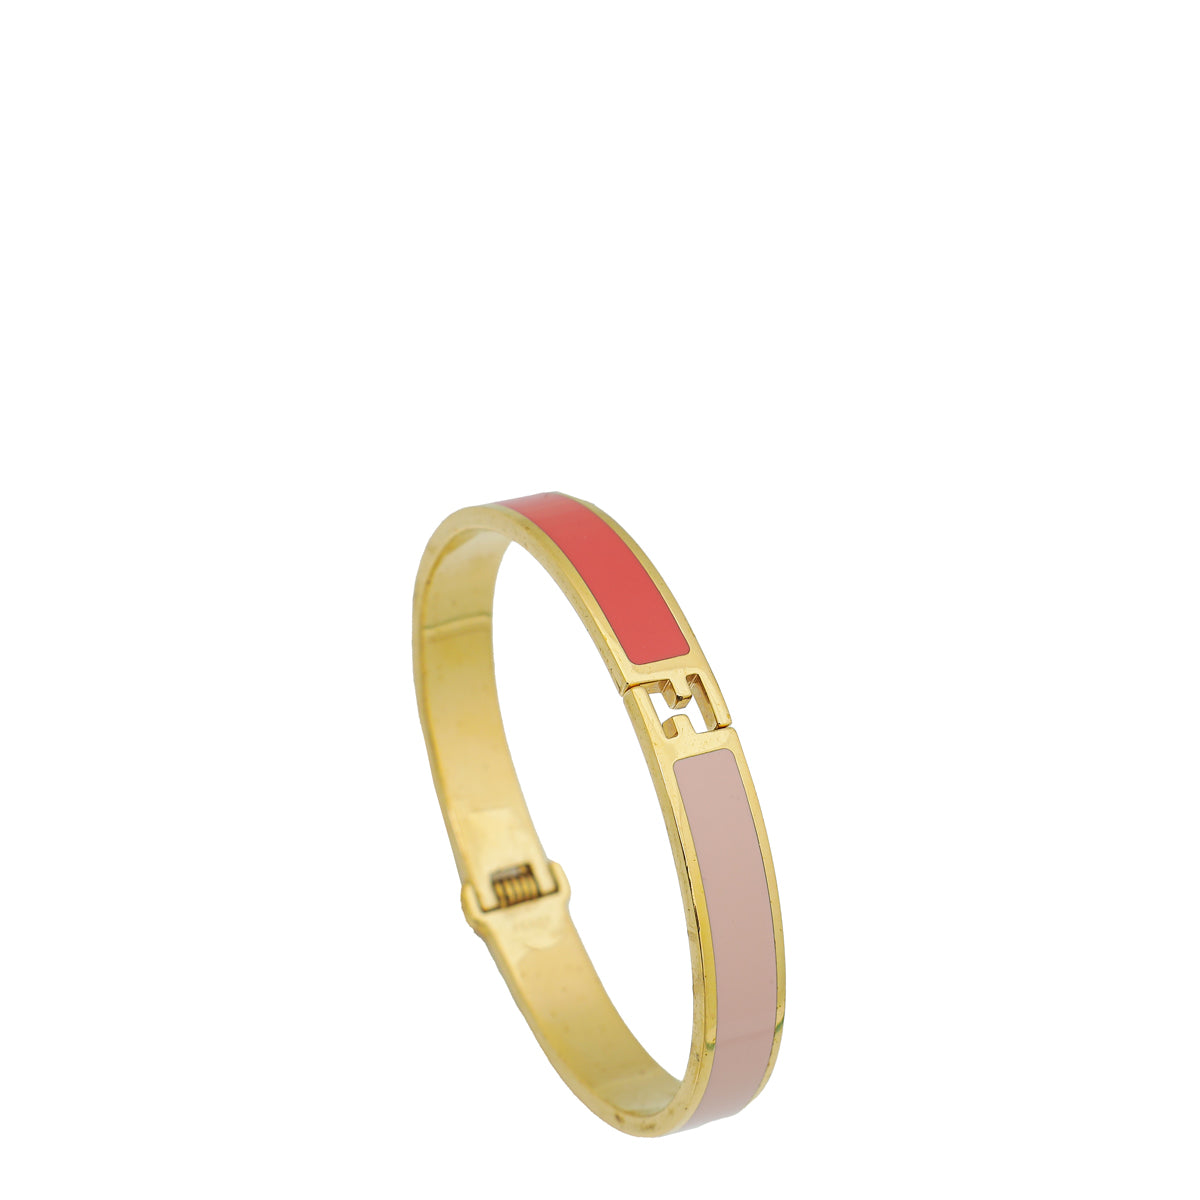 Fendi 'The Fendista' bangle Pink and Yellow Calfskin Leather Metal Bangle  Bracelet: Buy Online at Best Price in UAE - Amazon.ae